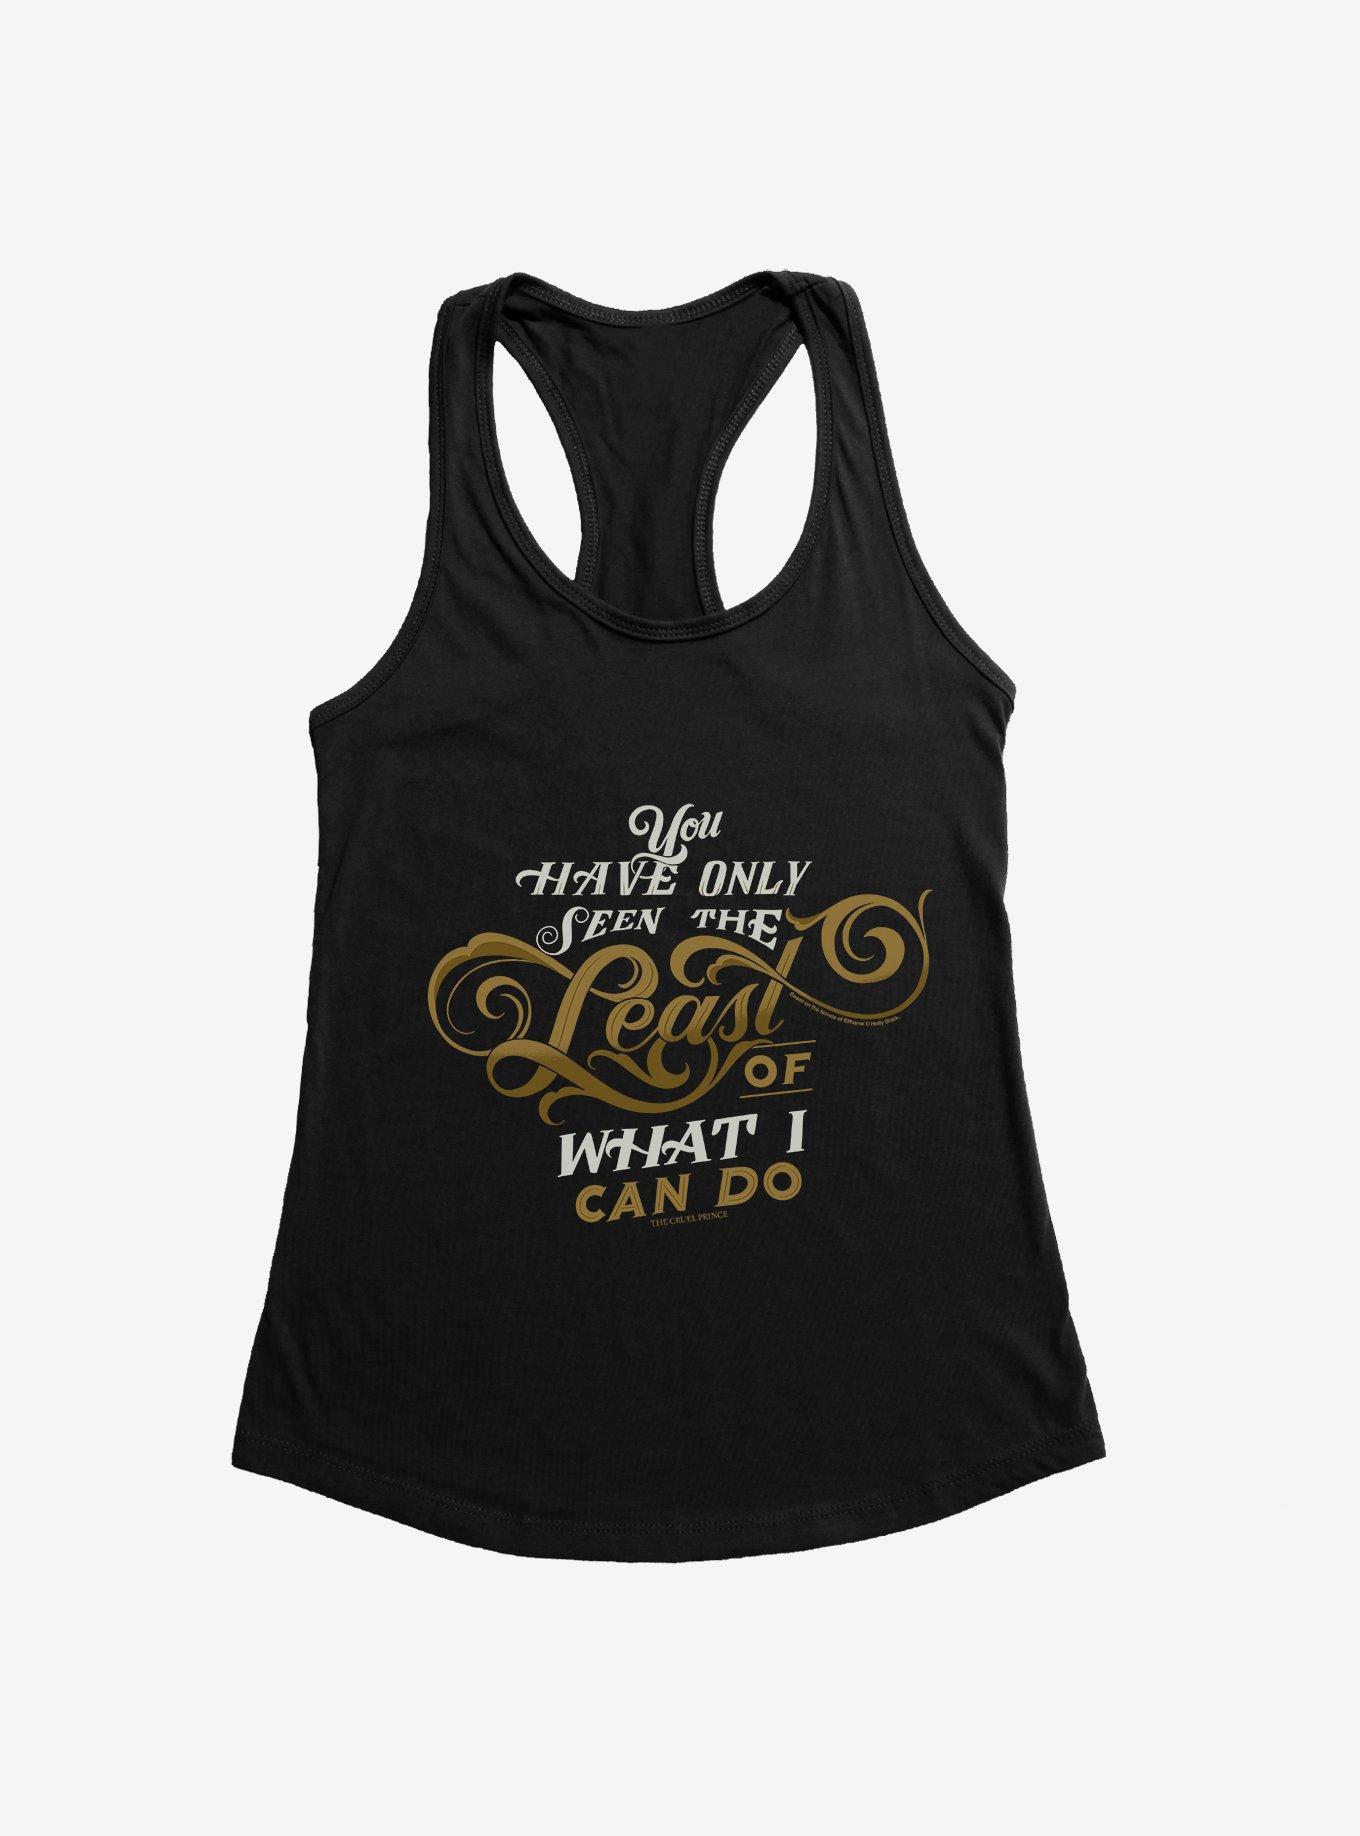 The Cruel Prince Sinister Enchantment Collection: You Have Only Seen Least Girls Tank